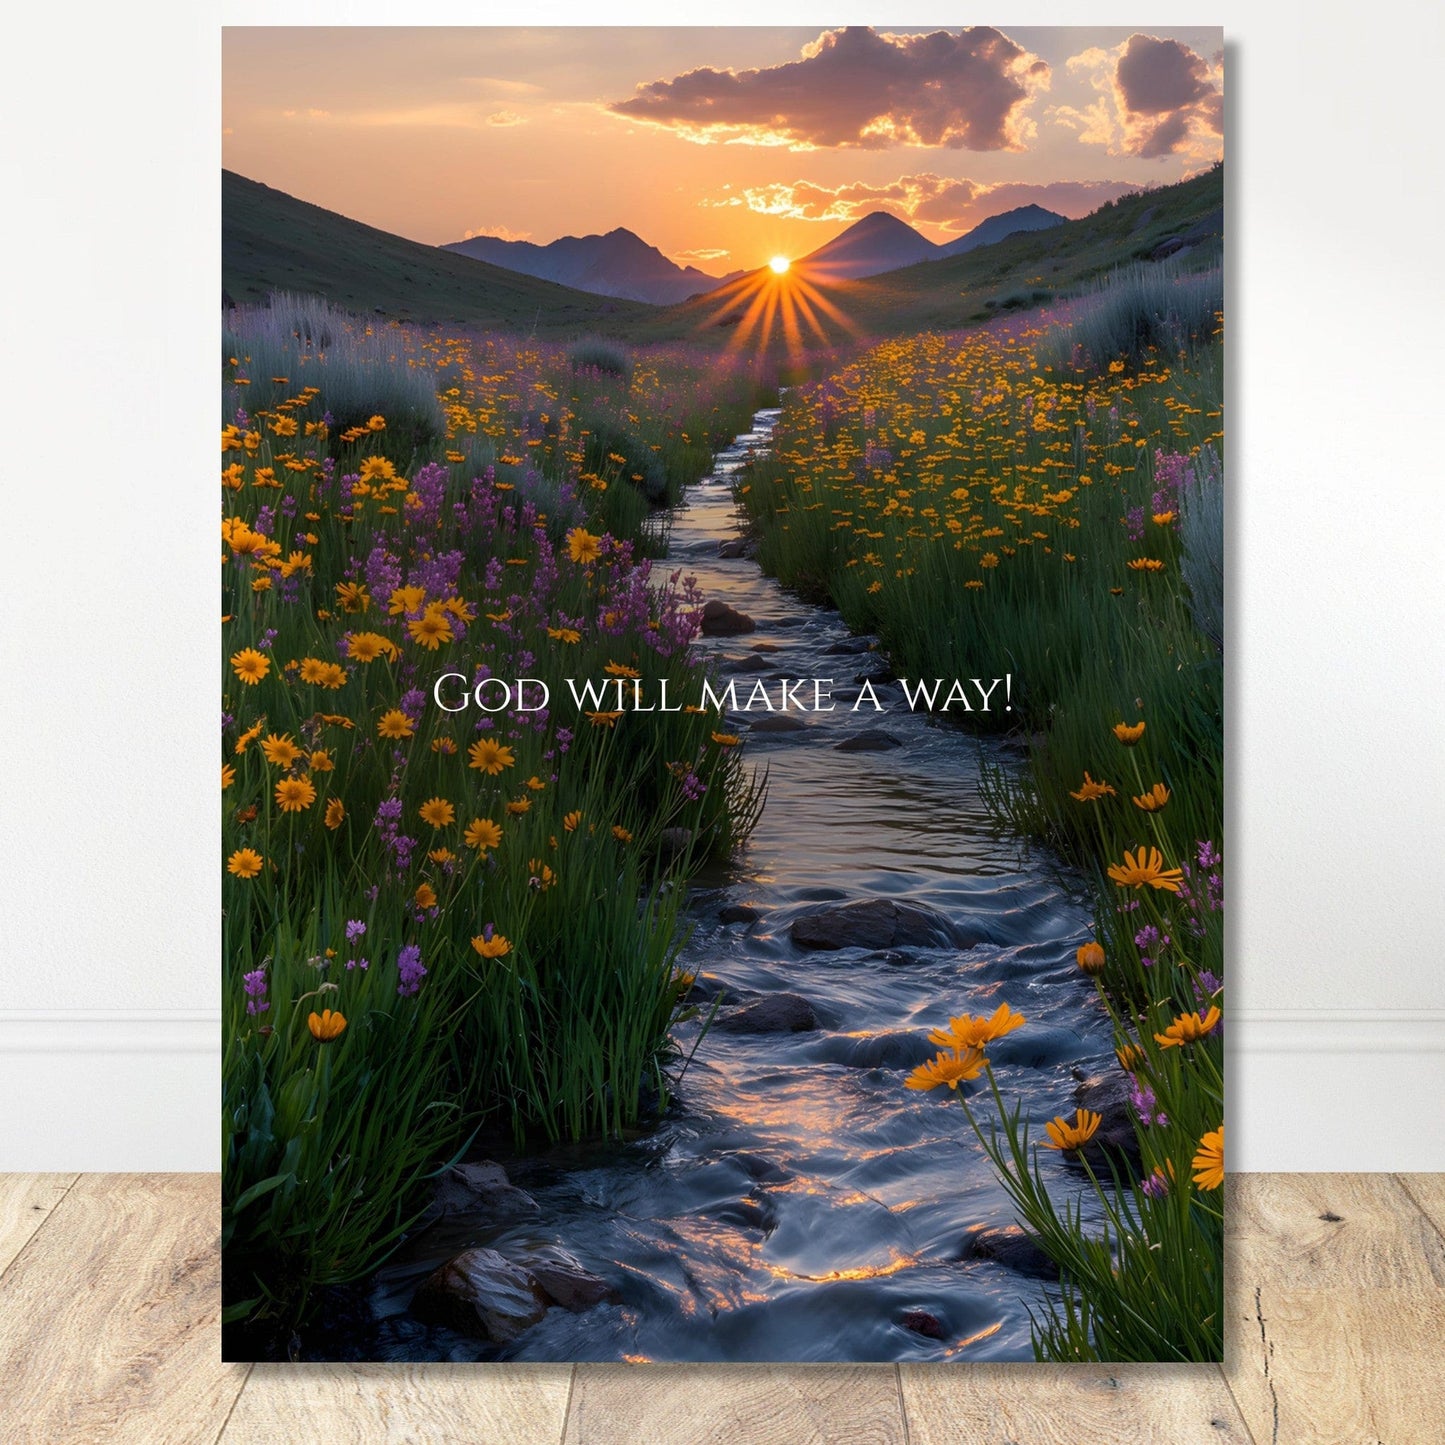 Coffee With My Father Print Material 30x40 cm / 12x16″ / Unframed / Unframed - Poster Only God Will Make A Way - Custom Art